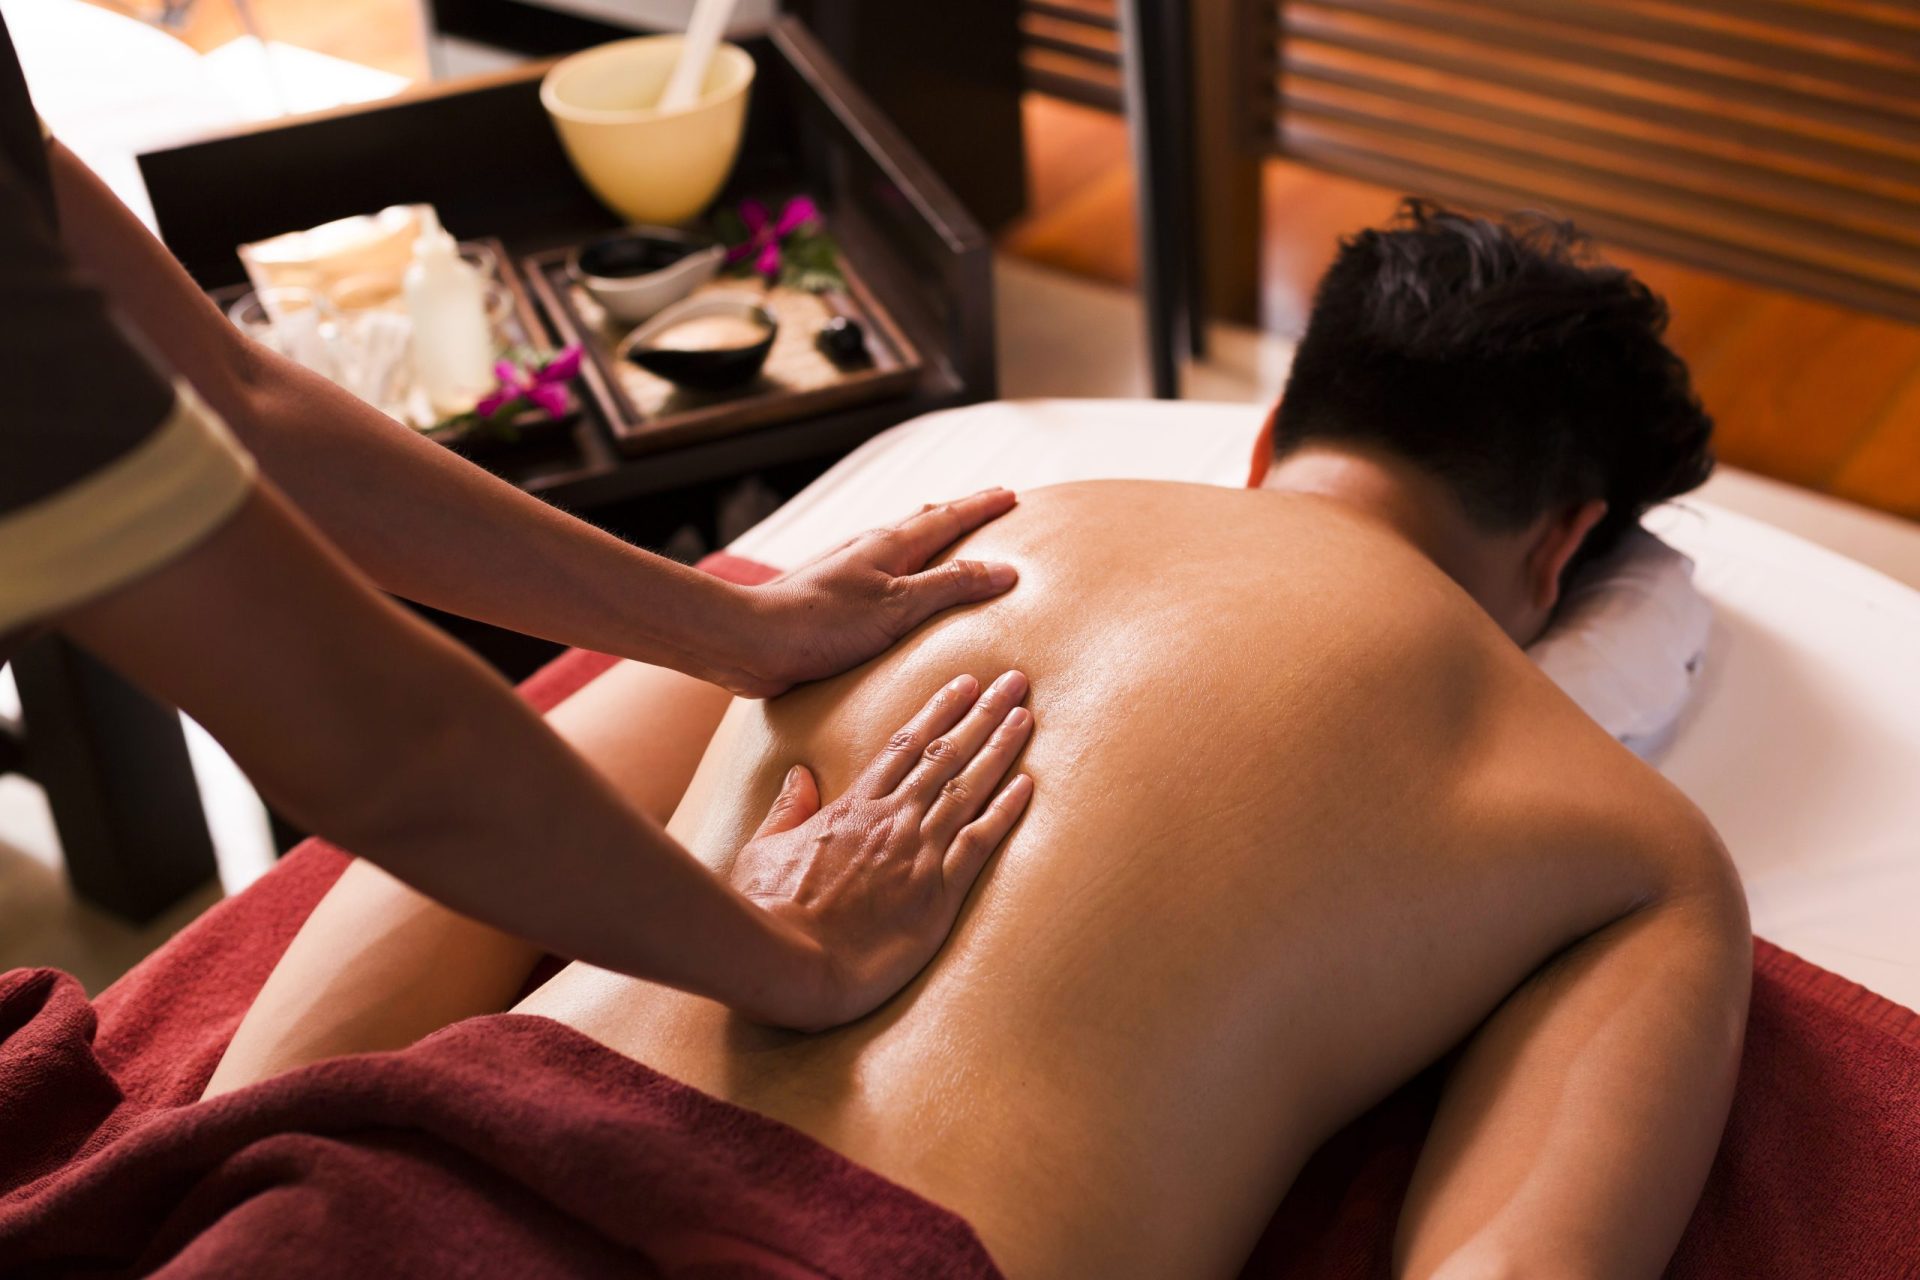 Are happy ending massages legal